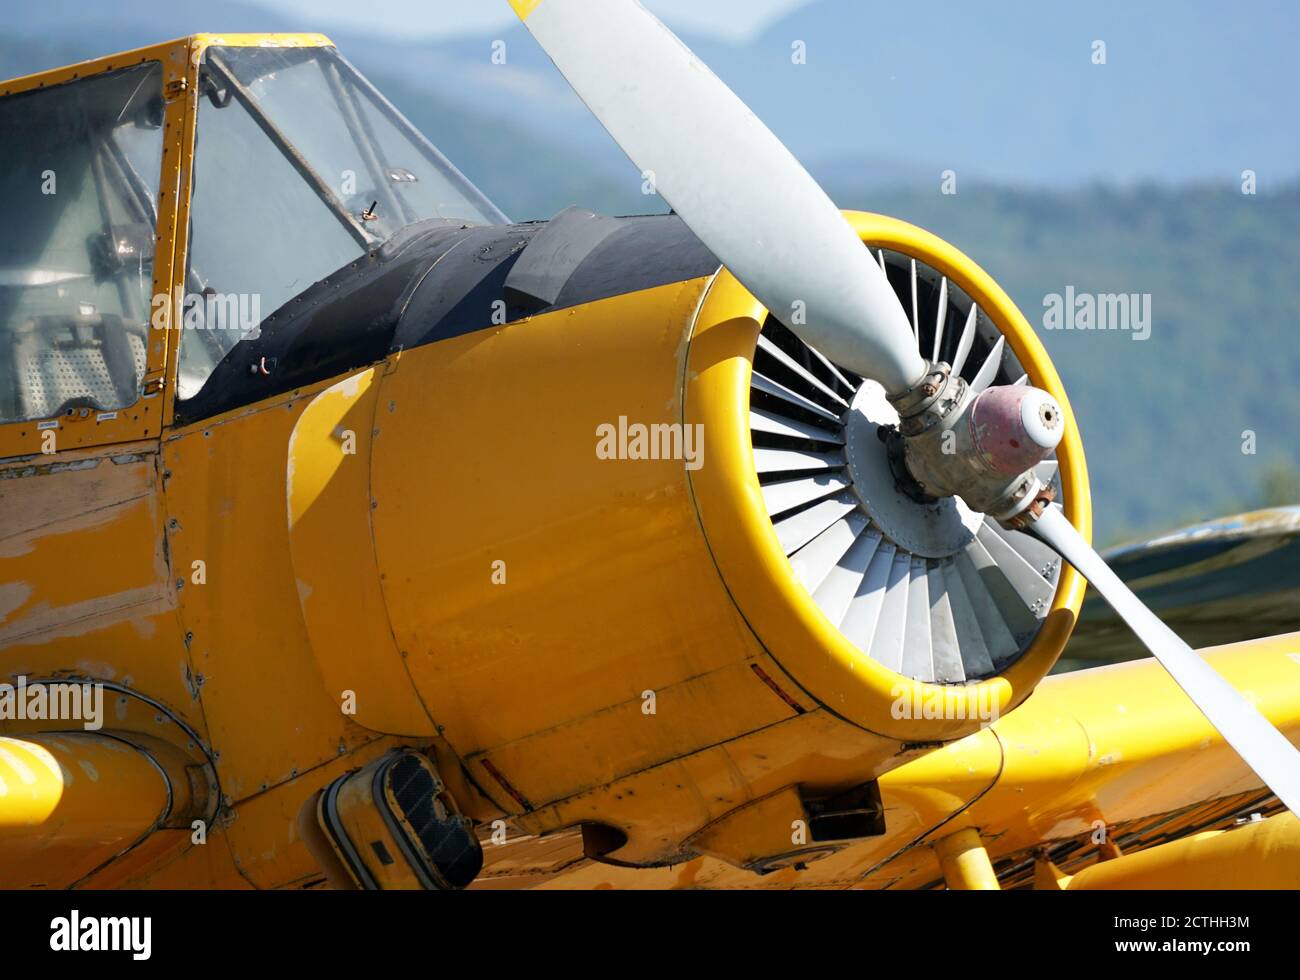 Single concept image of an yellow air-plane with reflections of the sun and copy space close-up shot. Stock Photo